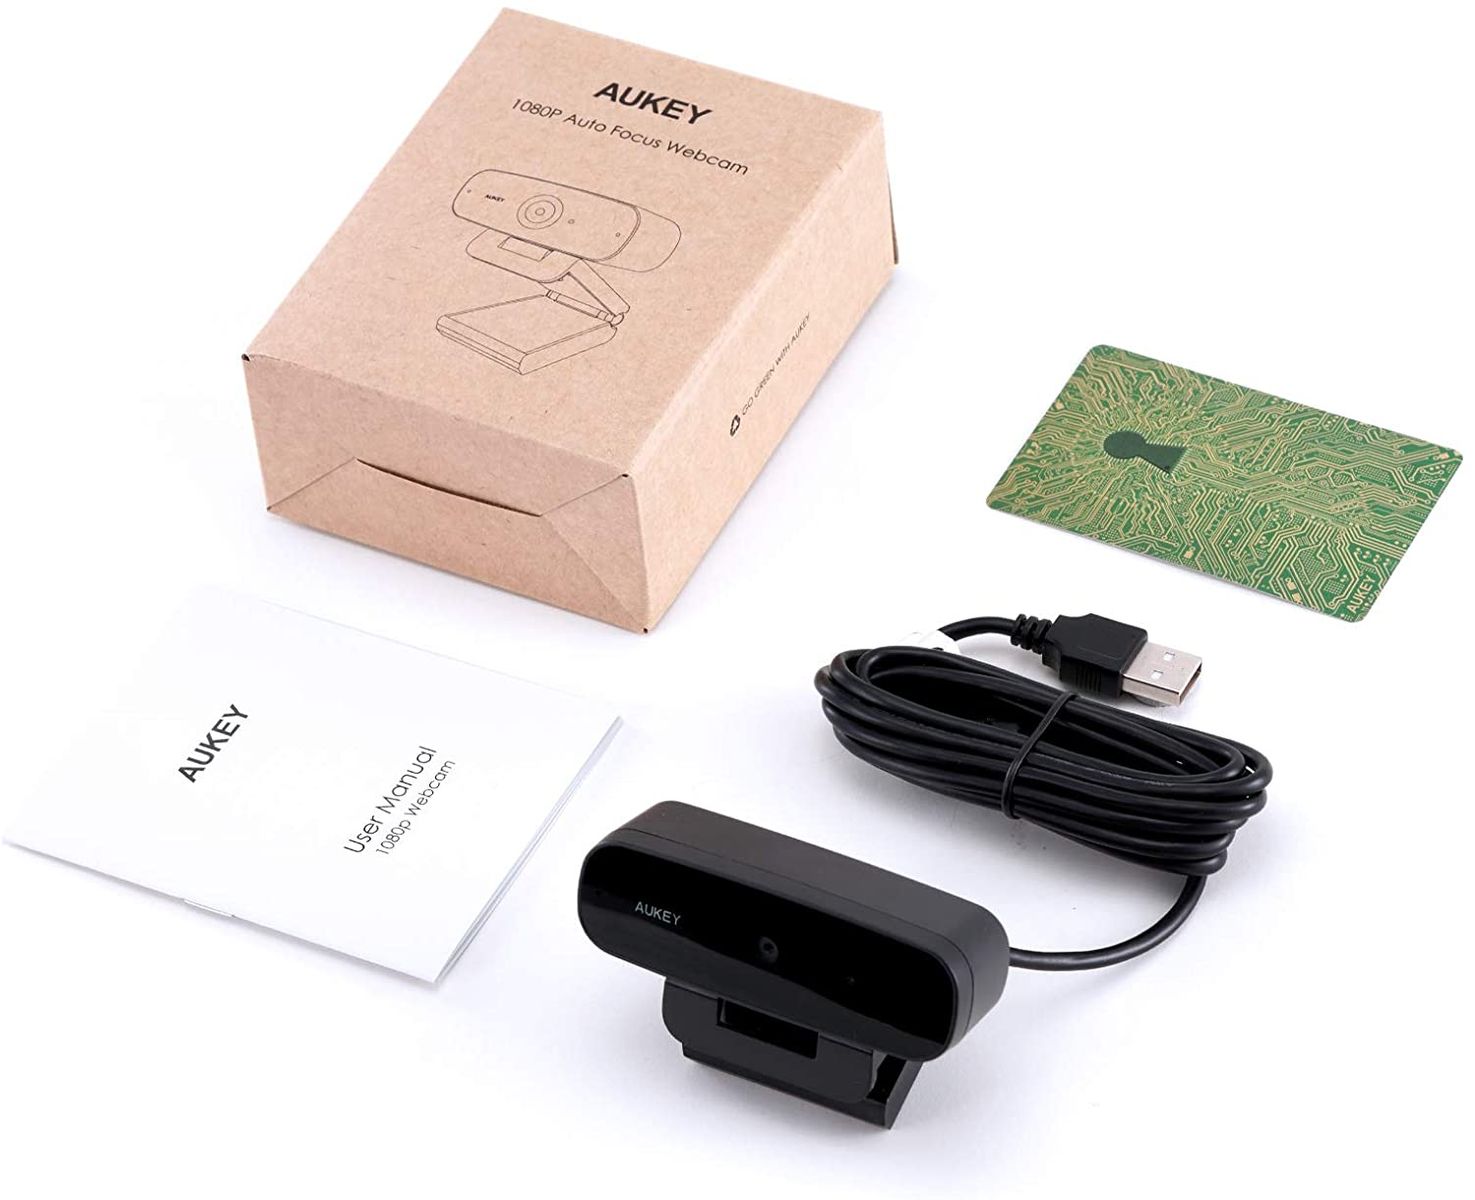 AUKEY Webcam 1080p Autofocus Streaming Webcam With Dual Stereo Microphones With Flexible Rotatable Wide-Angle Full HD